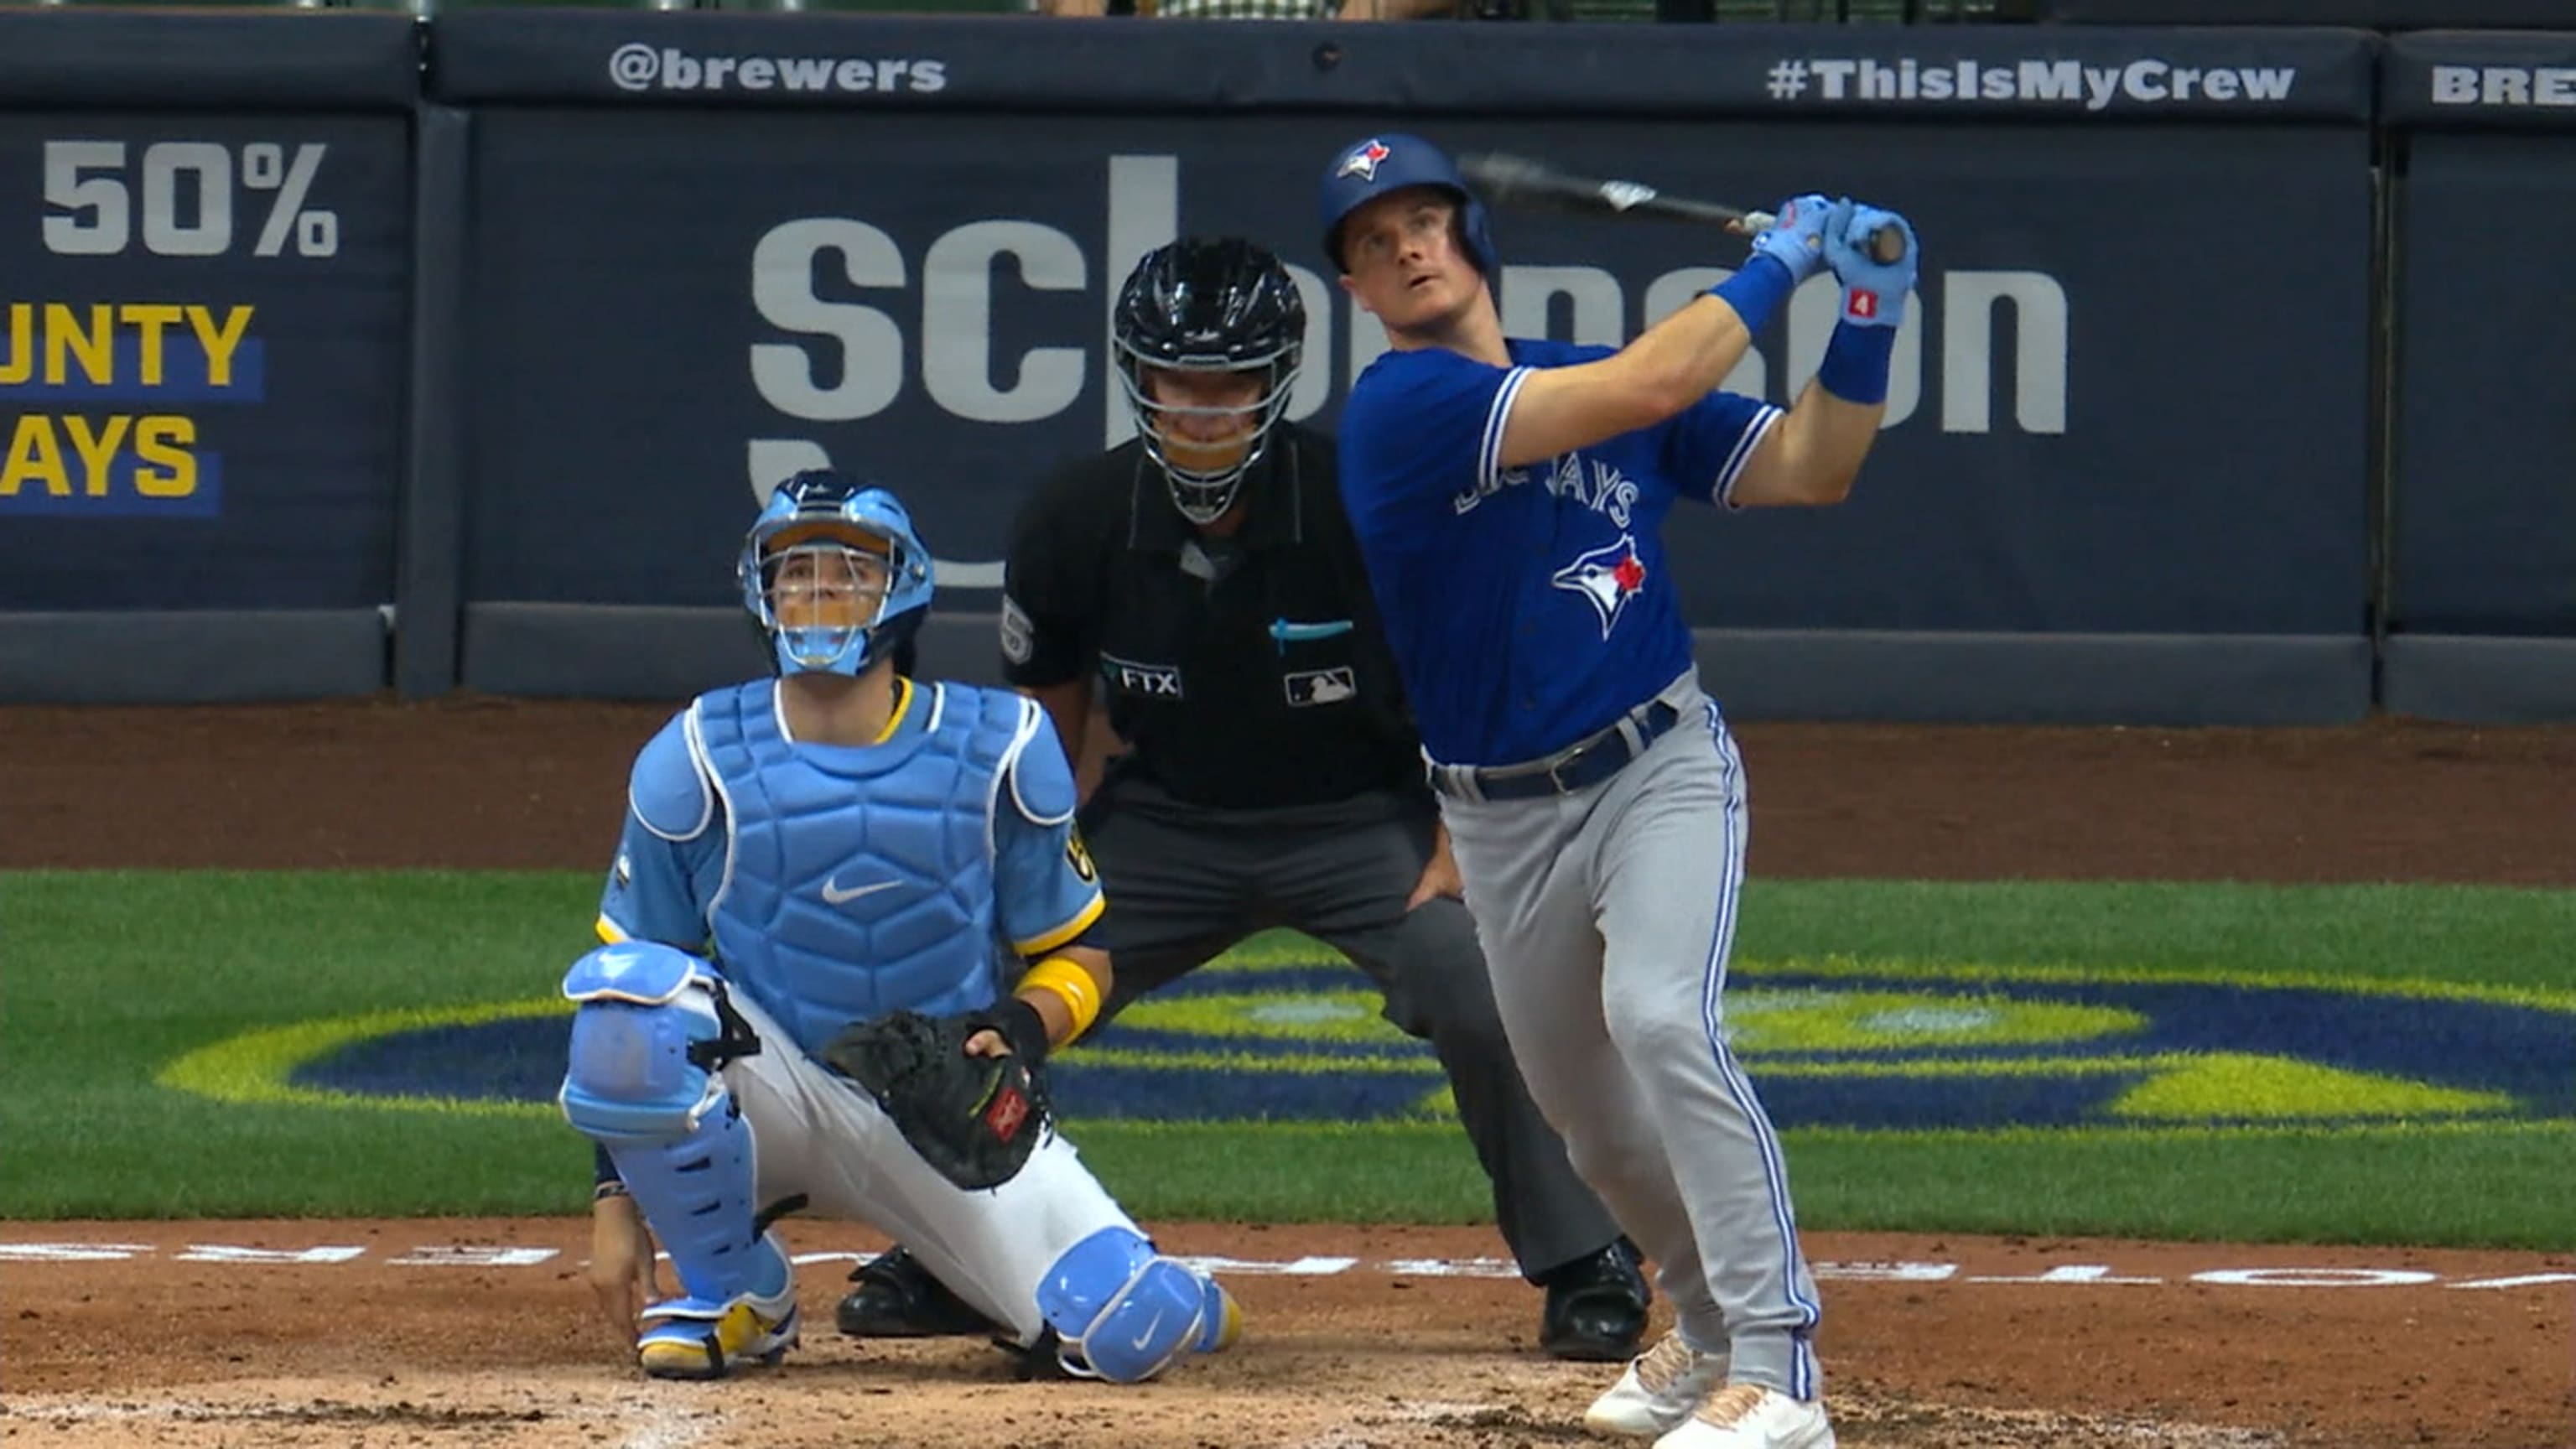 Early homers from Bichette, Chapman launch Blue Jays past Brewers